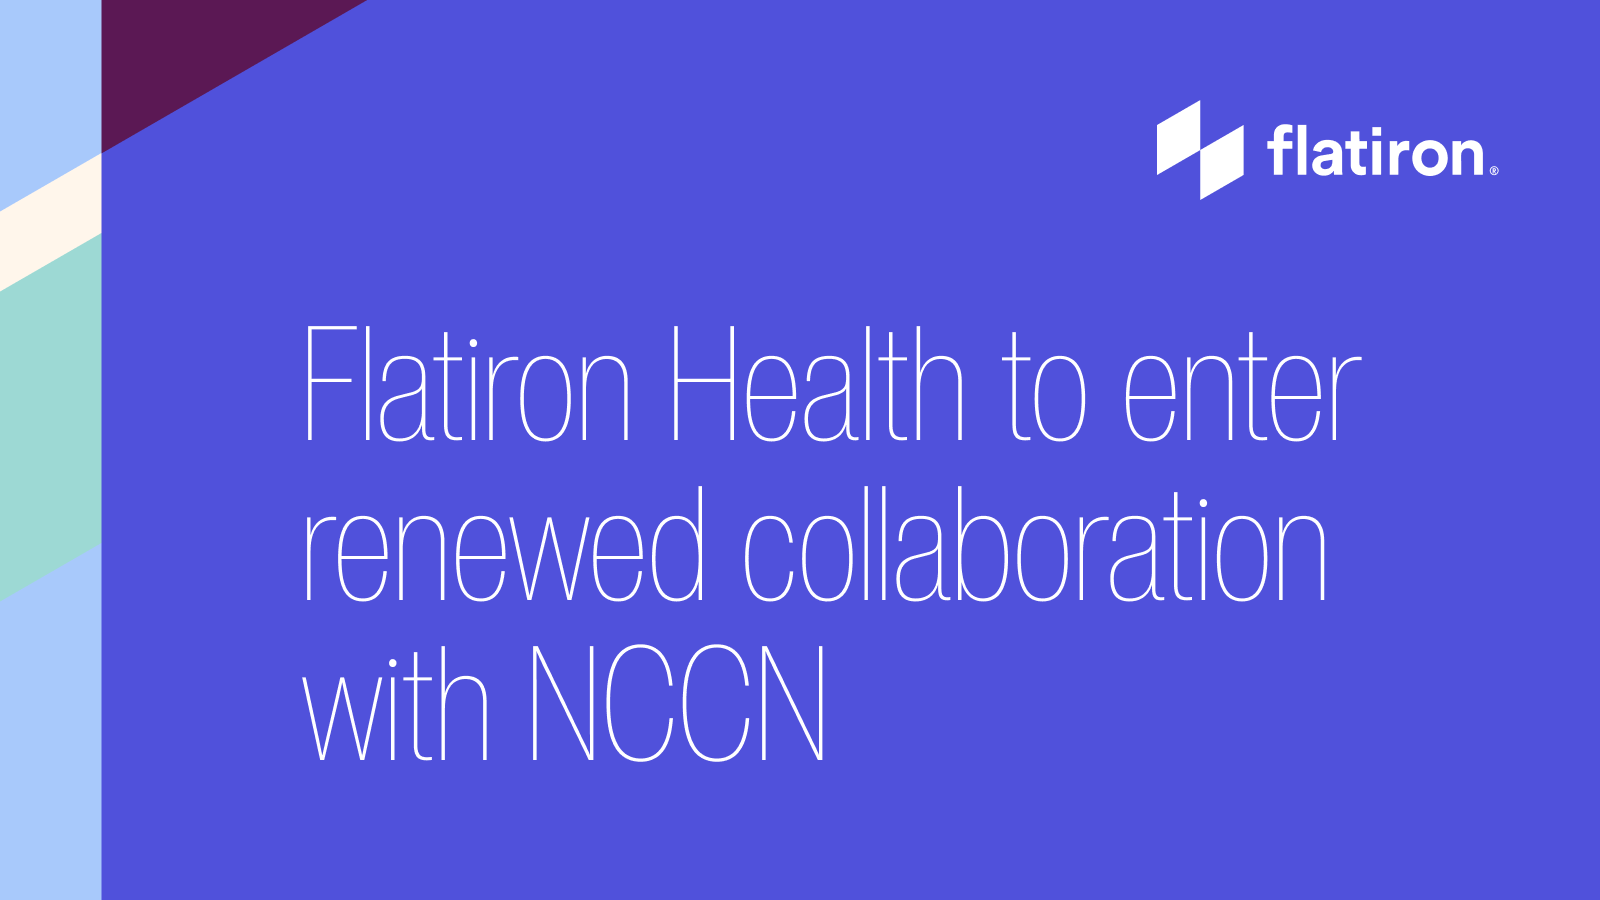 NCCN and Flatiron Health announce collaboration to improve cancer care quality with real-world data